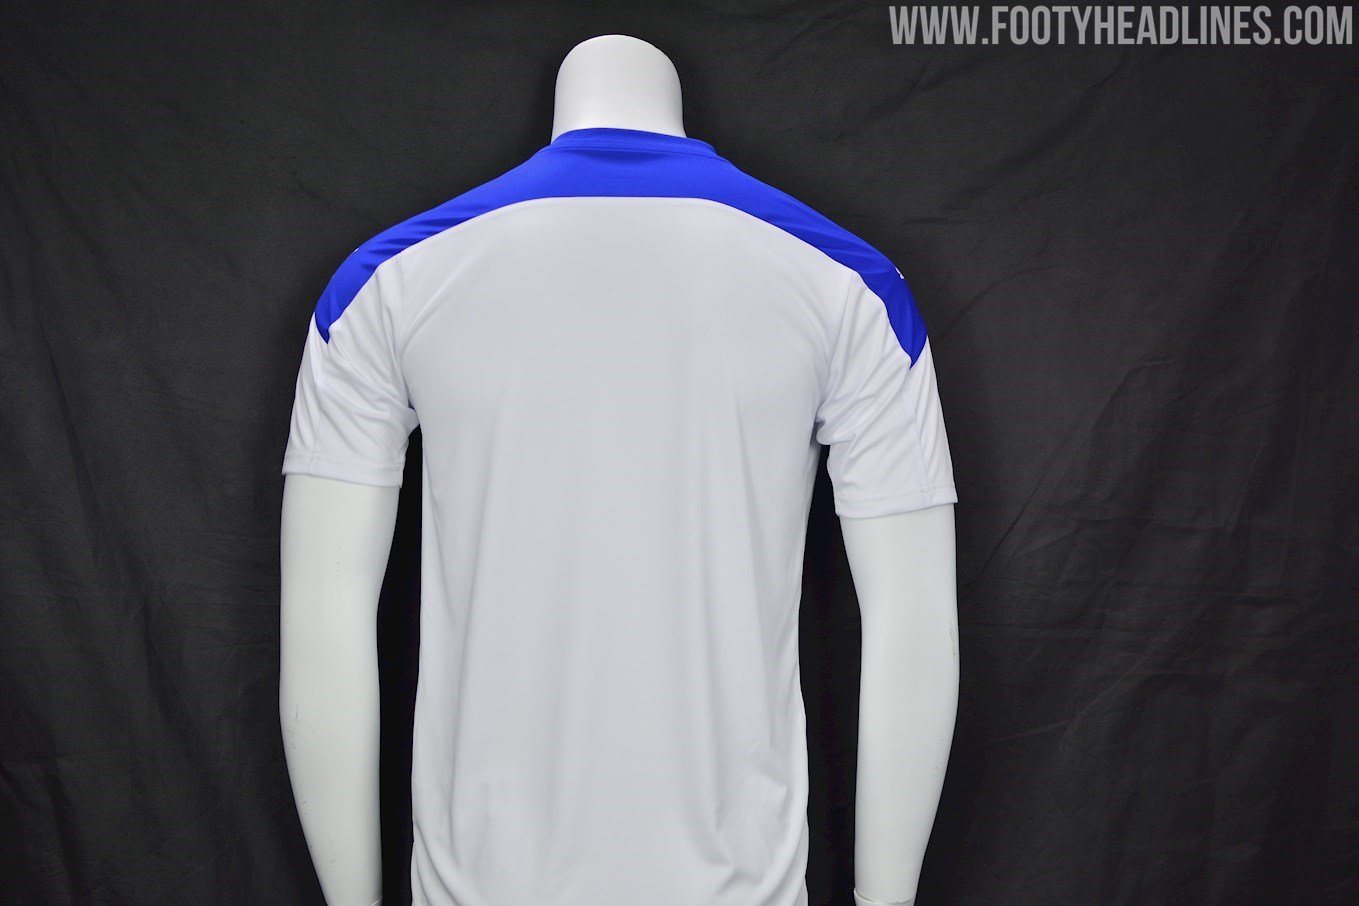 Tranmere Rovers 20-21 Home Kit Released - Footy Headlines